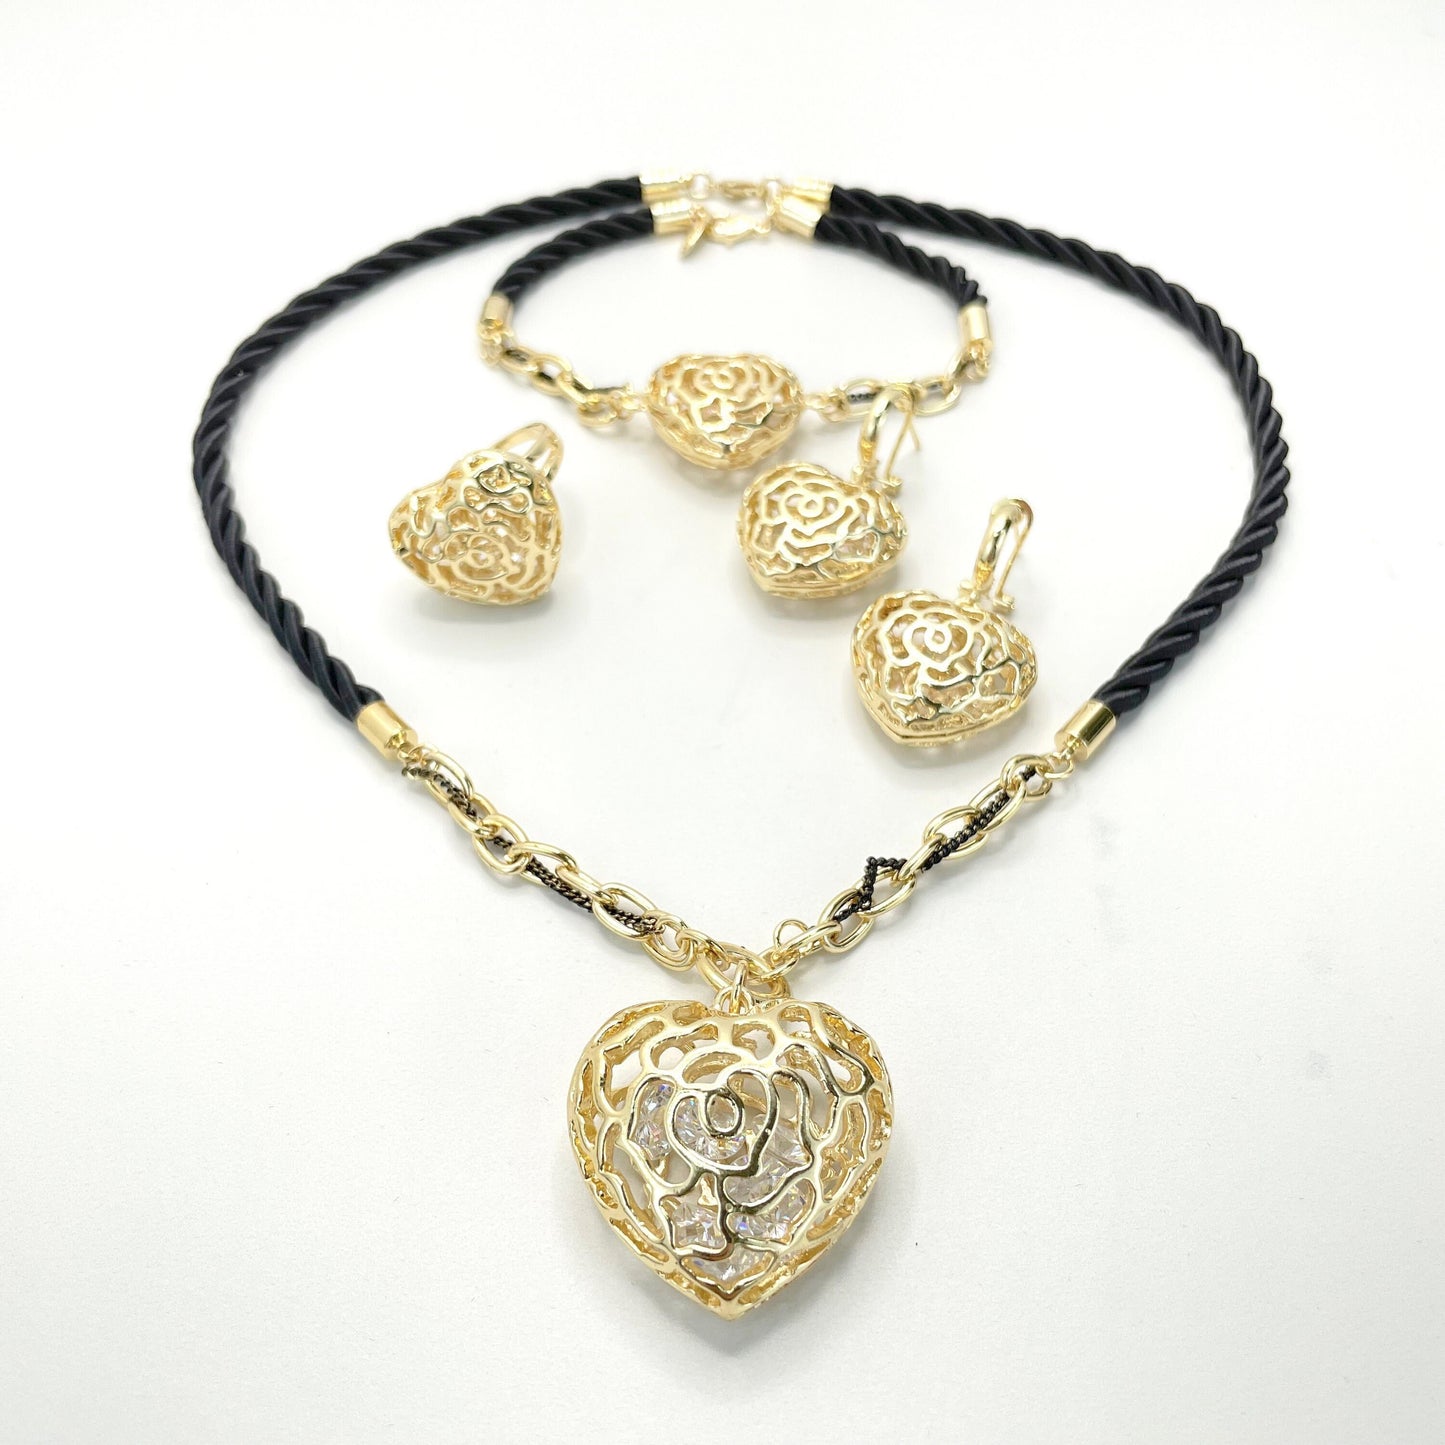 18k Gold Filled Black Satin Rope Set, Large Puffy Heart with Rattle Stones inside, 04 Pieces, Wholesale Jewelry Making Supplies